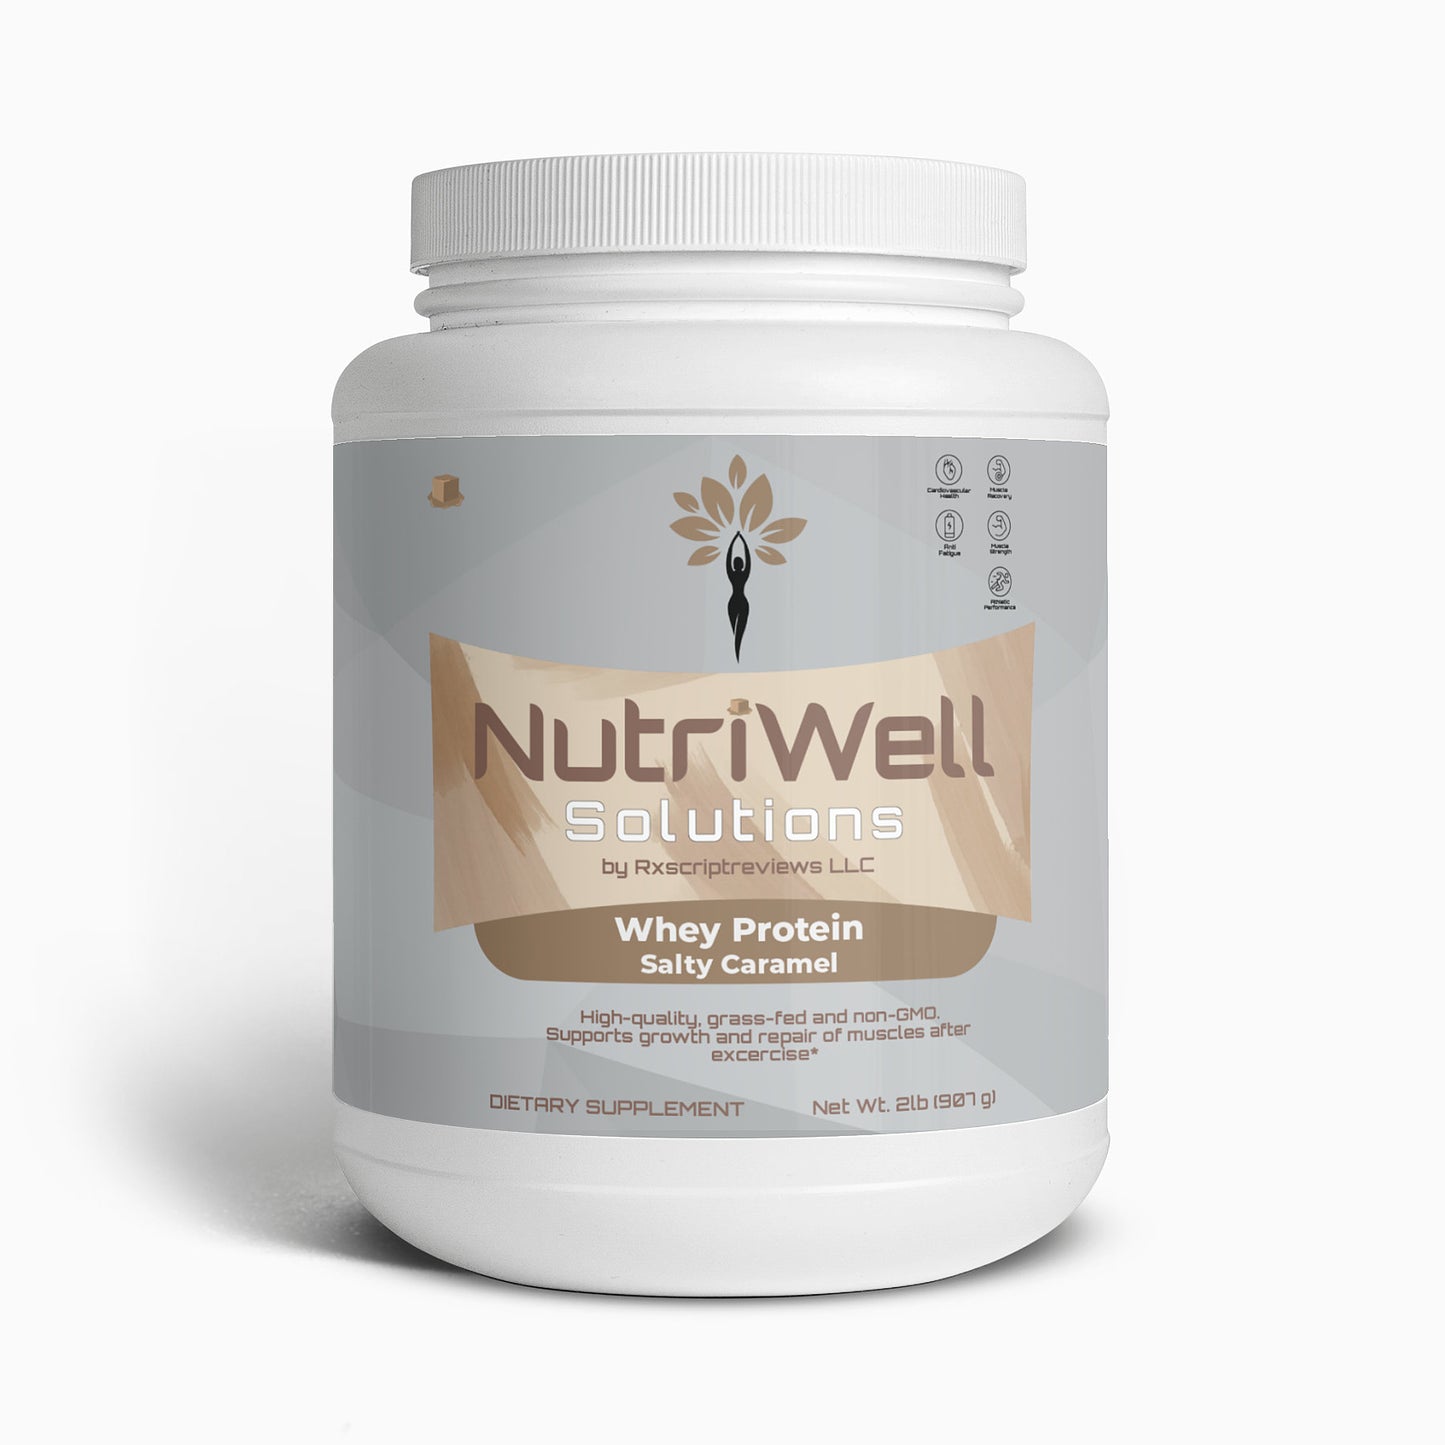 NutriWell Solutions' Whey Protein (Salty Caramel Flavor)